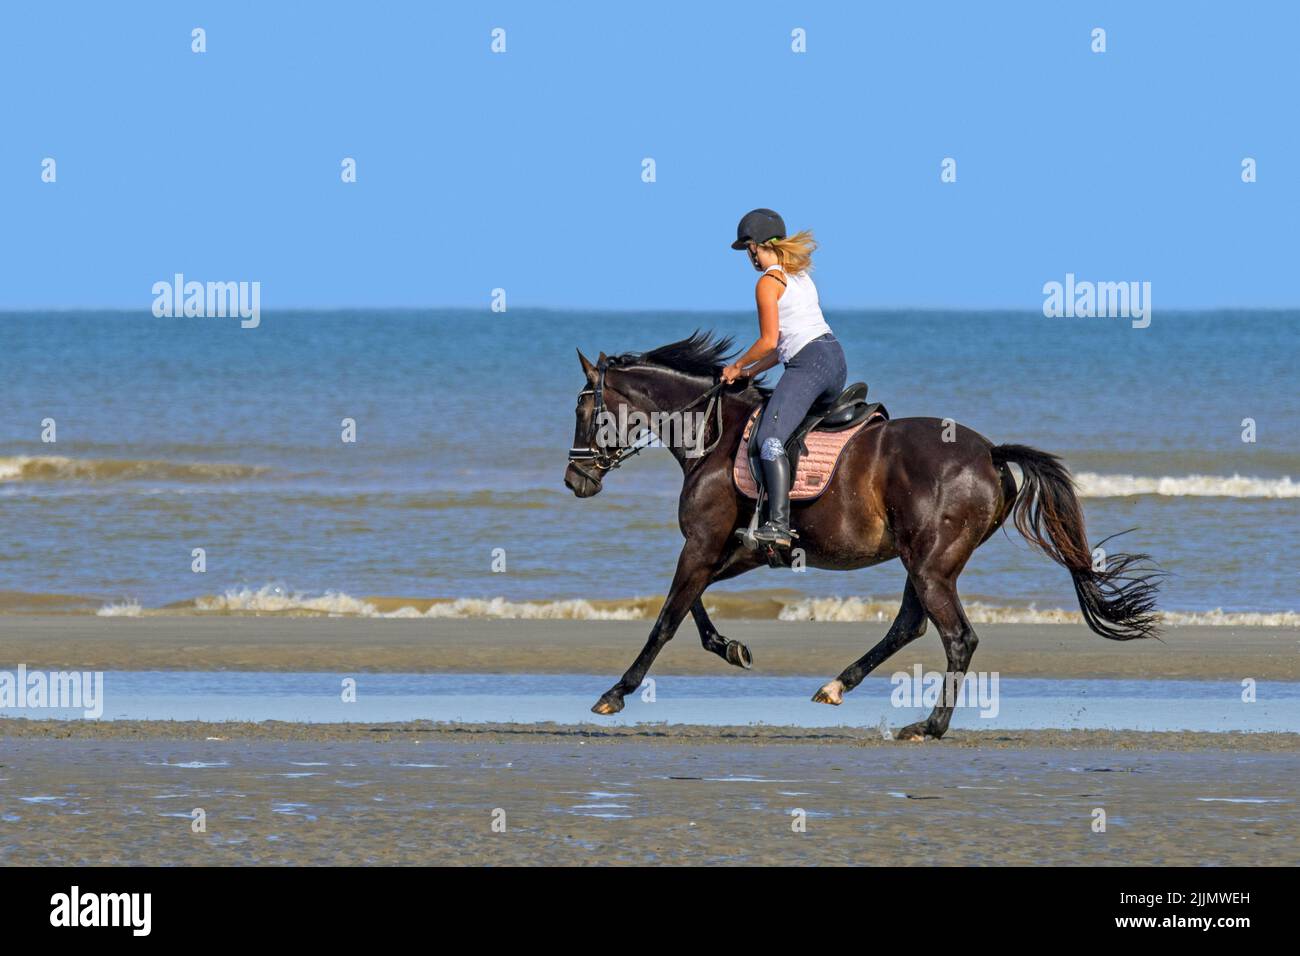 Horsewoman / female horse rider on horseback galloping on the beach along the North Sea coast in summer Stock Photo